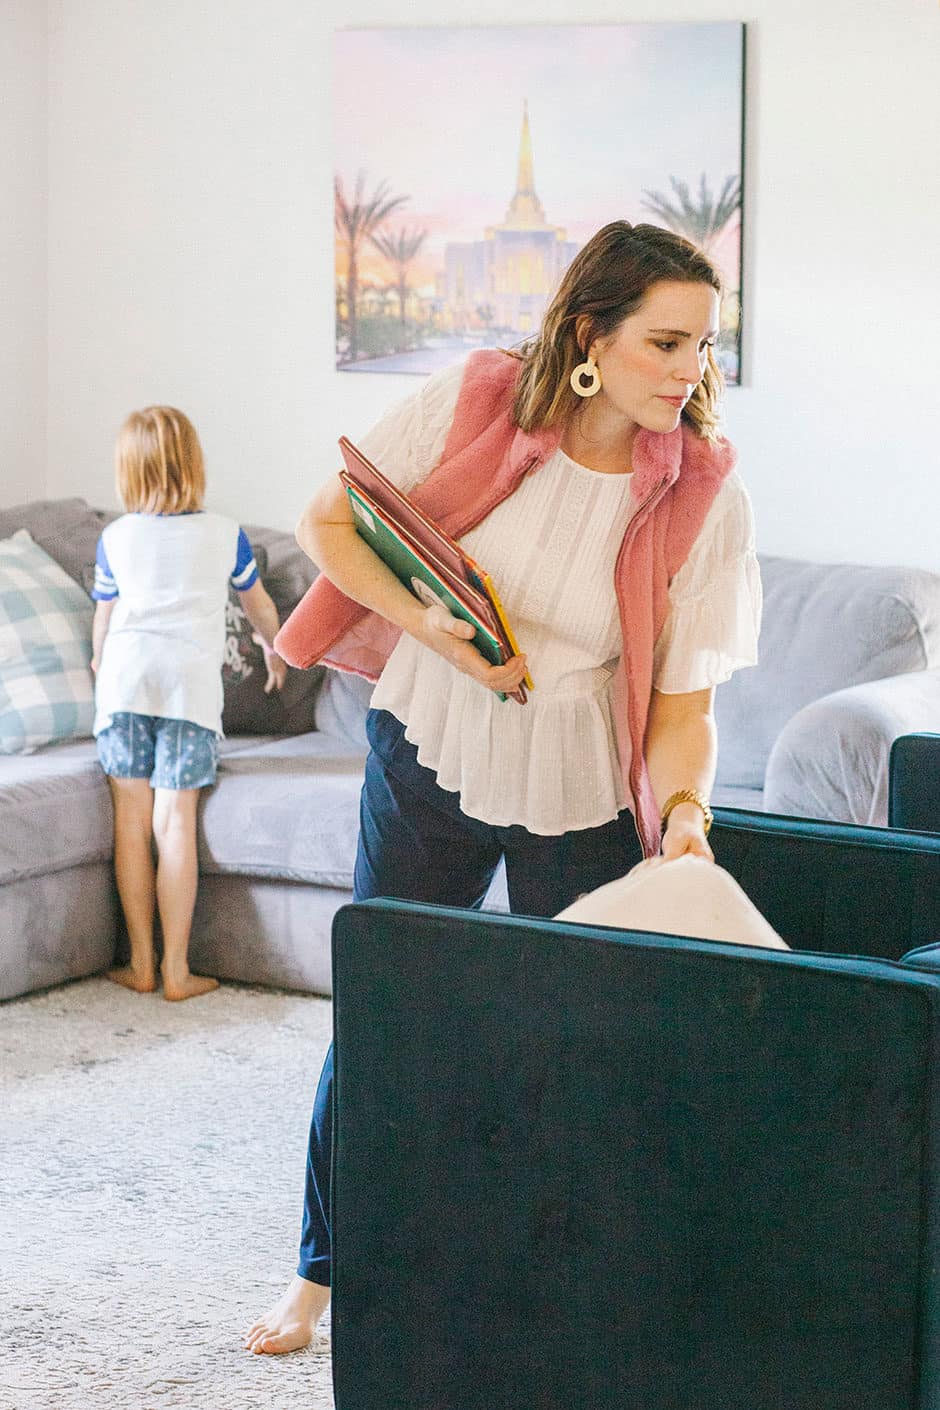 Every mom deals with dirt but this daily cleaning schedule, along with some great cleaning products, will have your home looking great in no time!